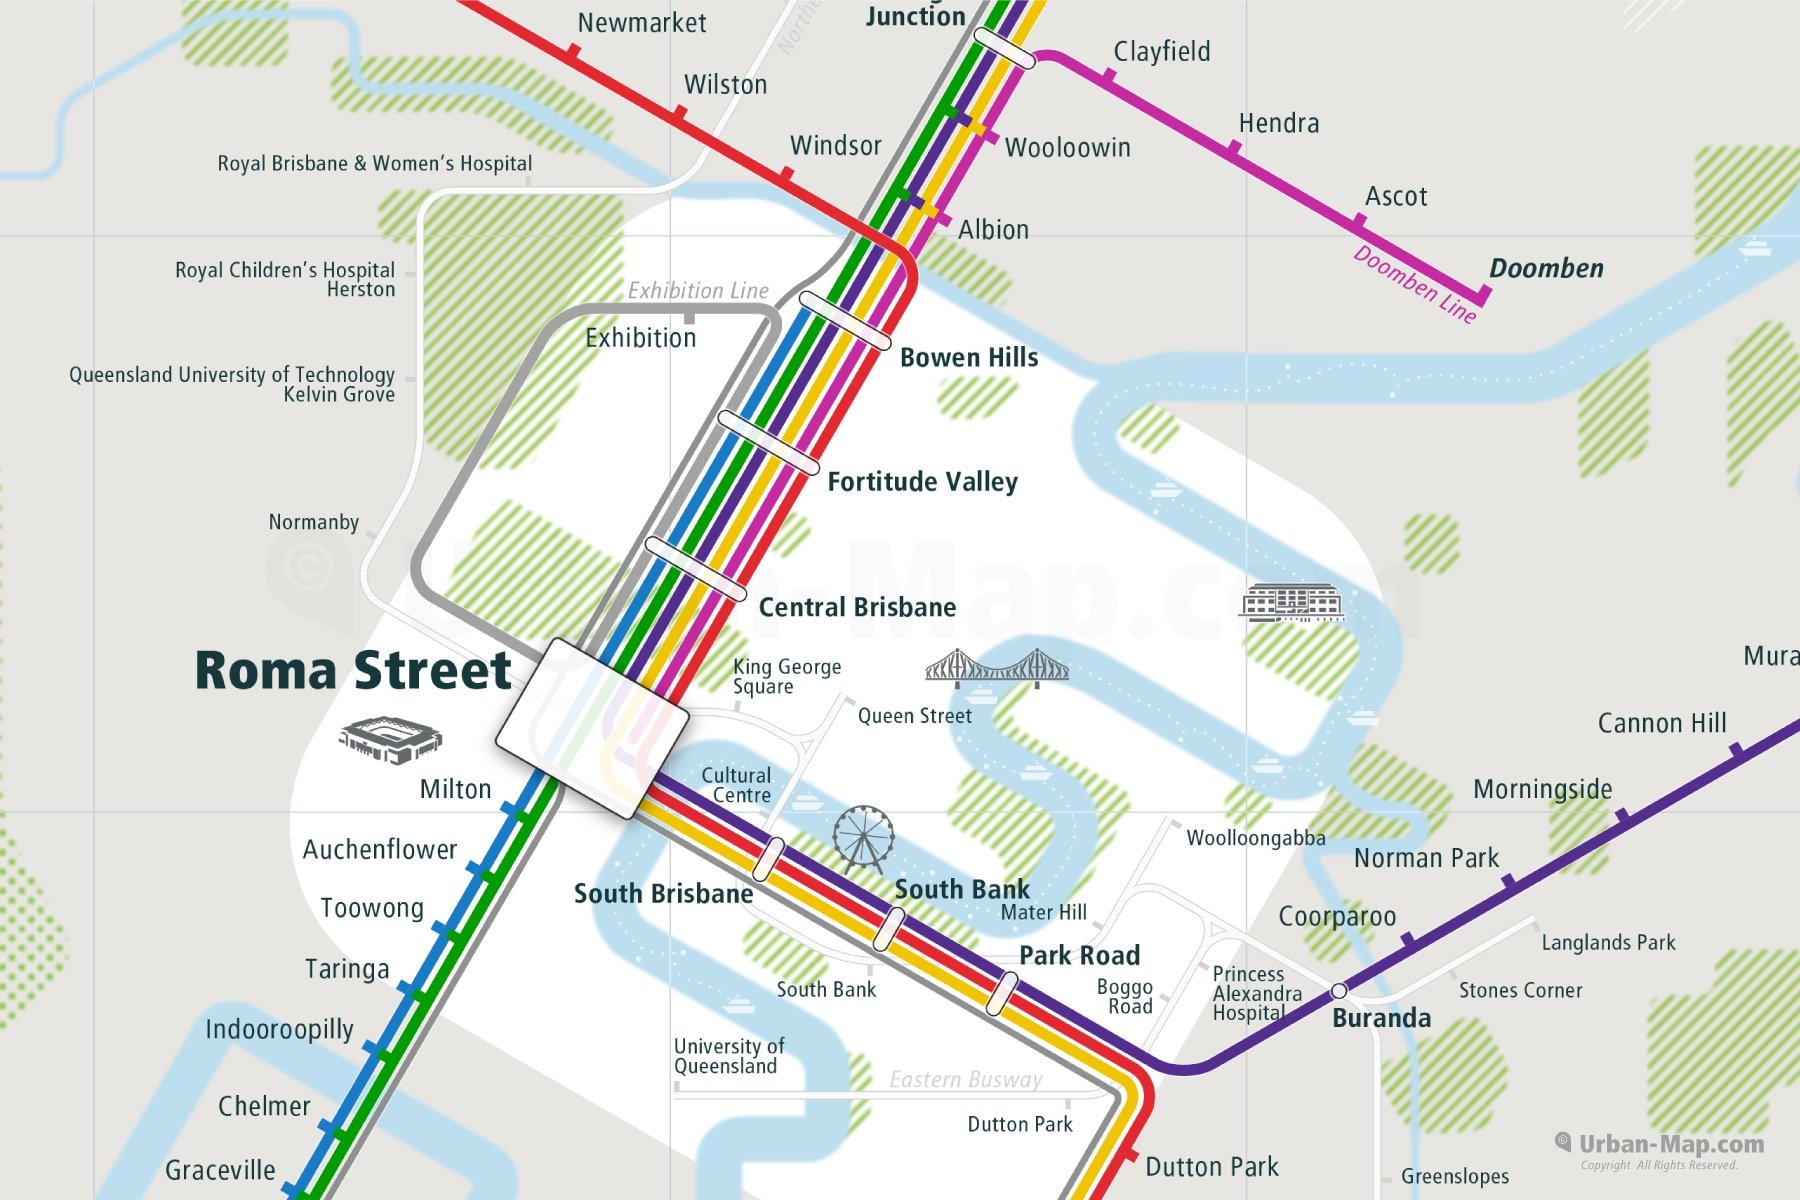 Brisbane City Rail Map shows the train and public transportation routes of Commuter Train, Tram, Busway, Airport Link - Close-Up